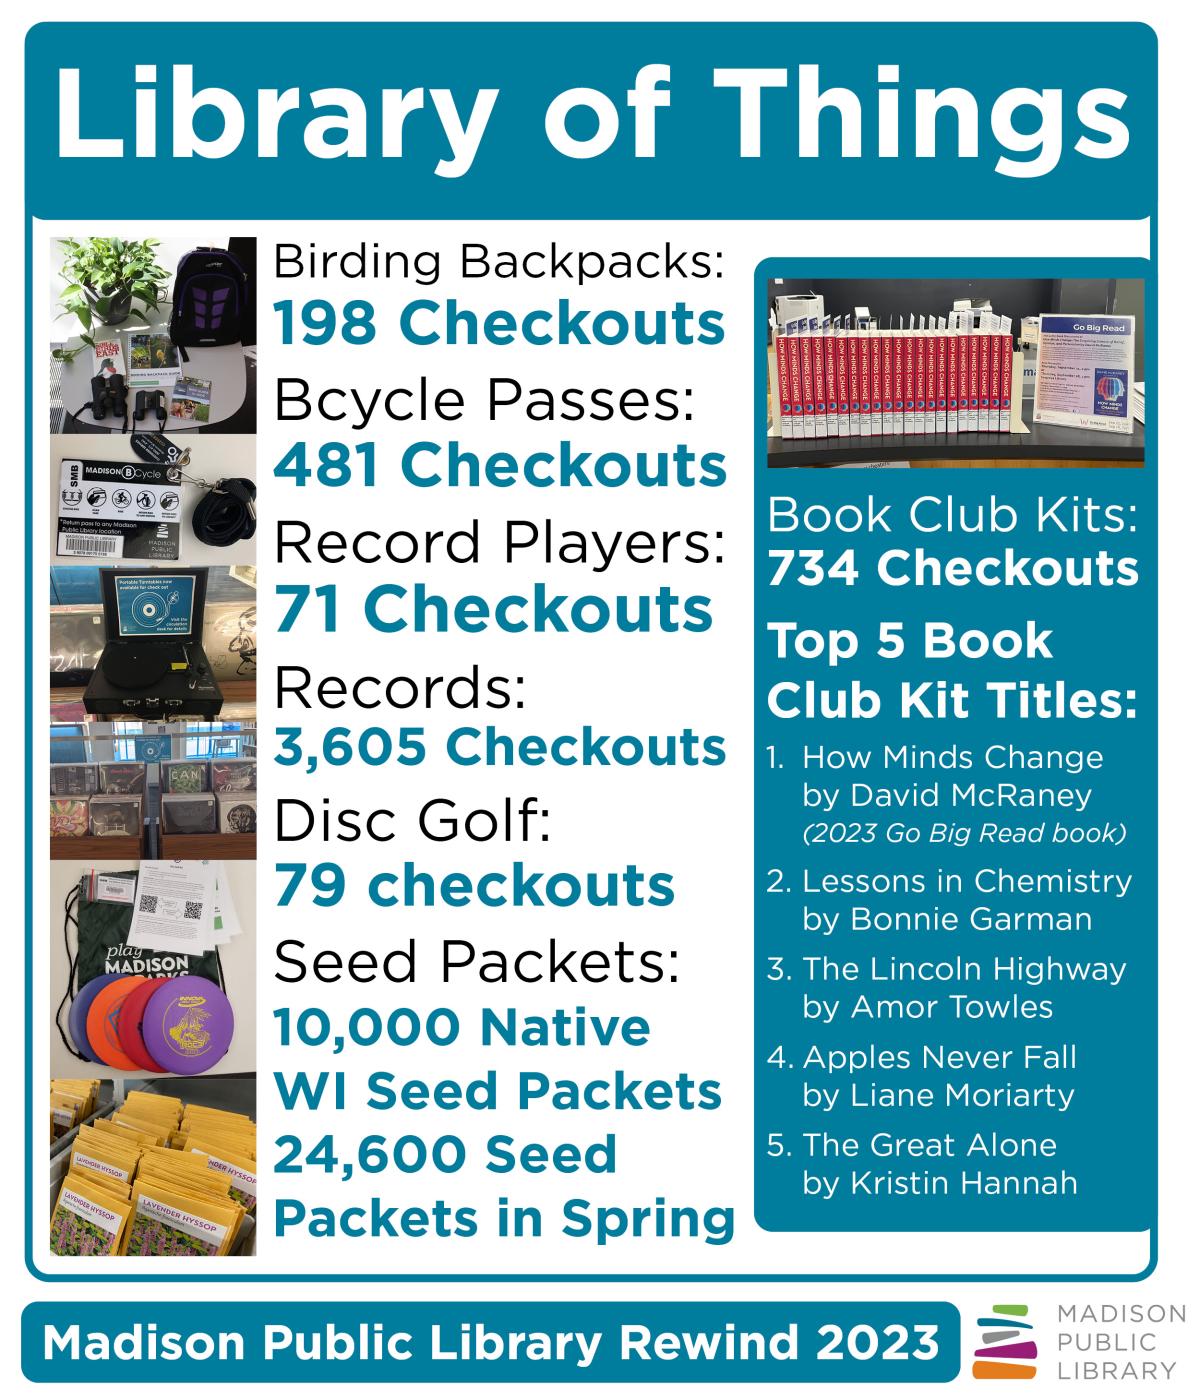 Madison Public Library Year in Review 2023 Library of Things numbers